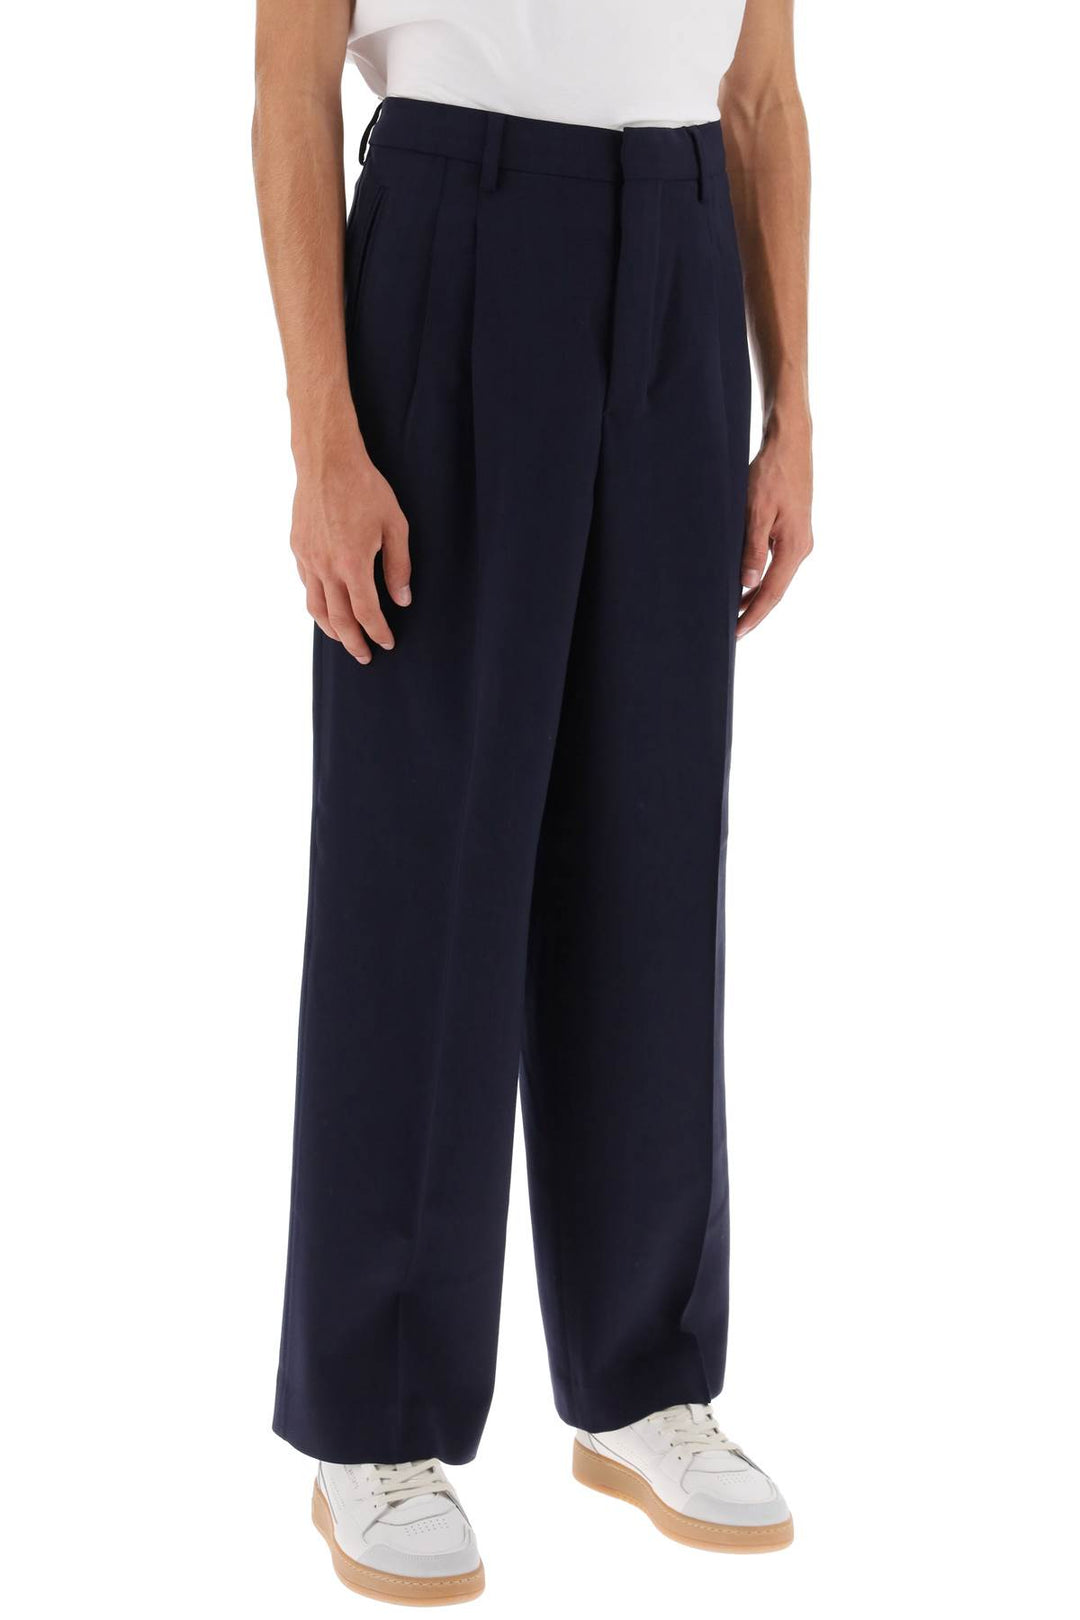 Ami paris loose fit pants with straight cut-1